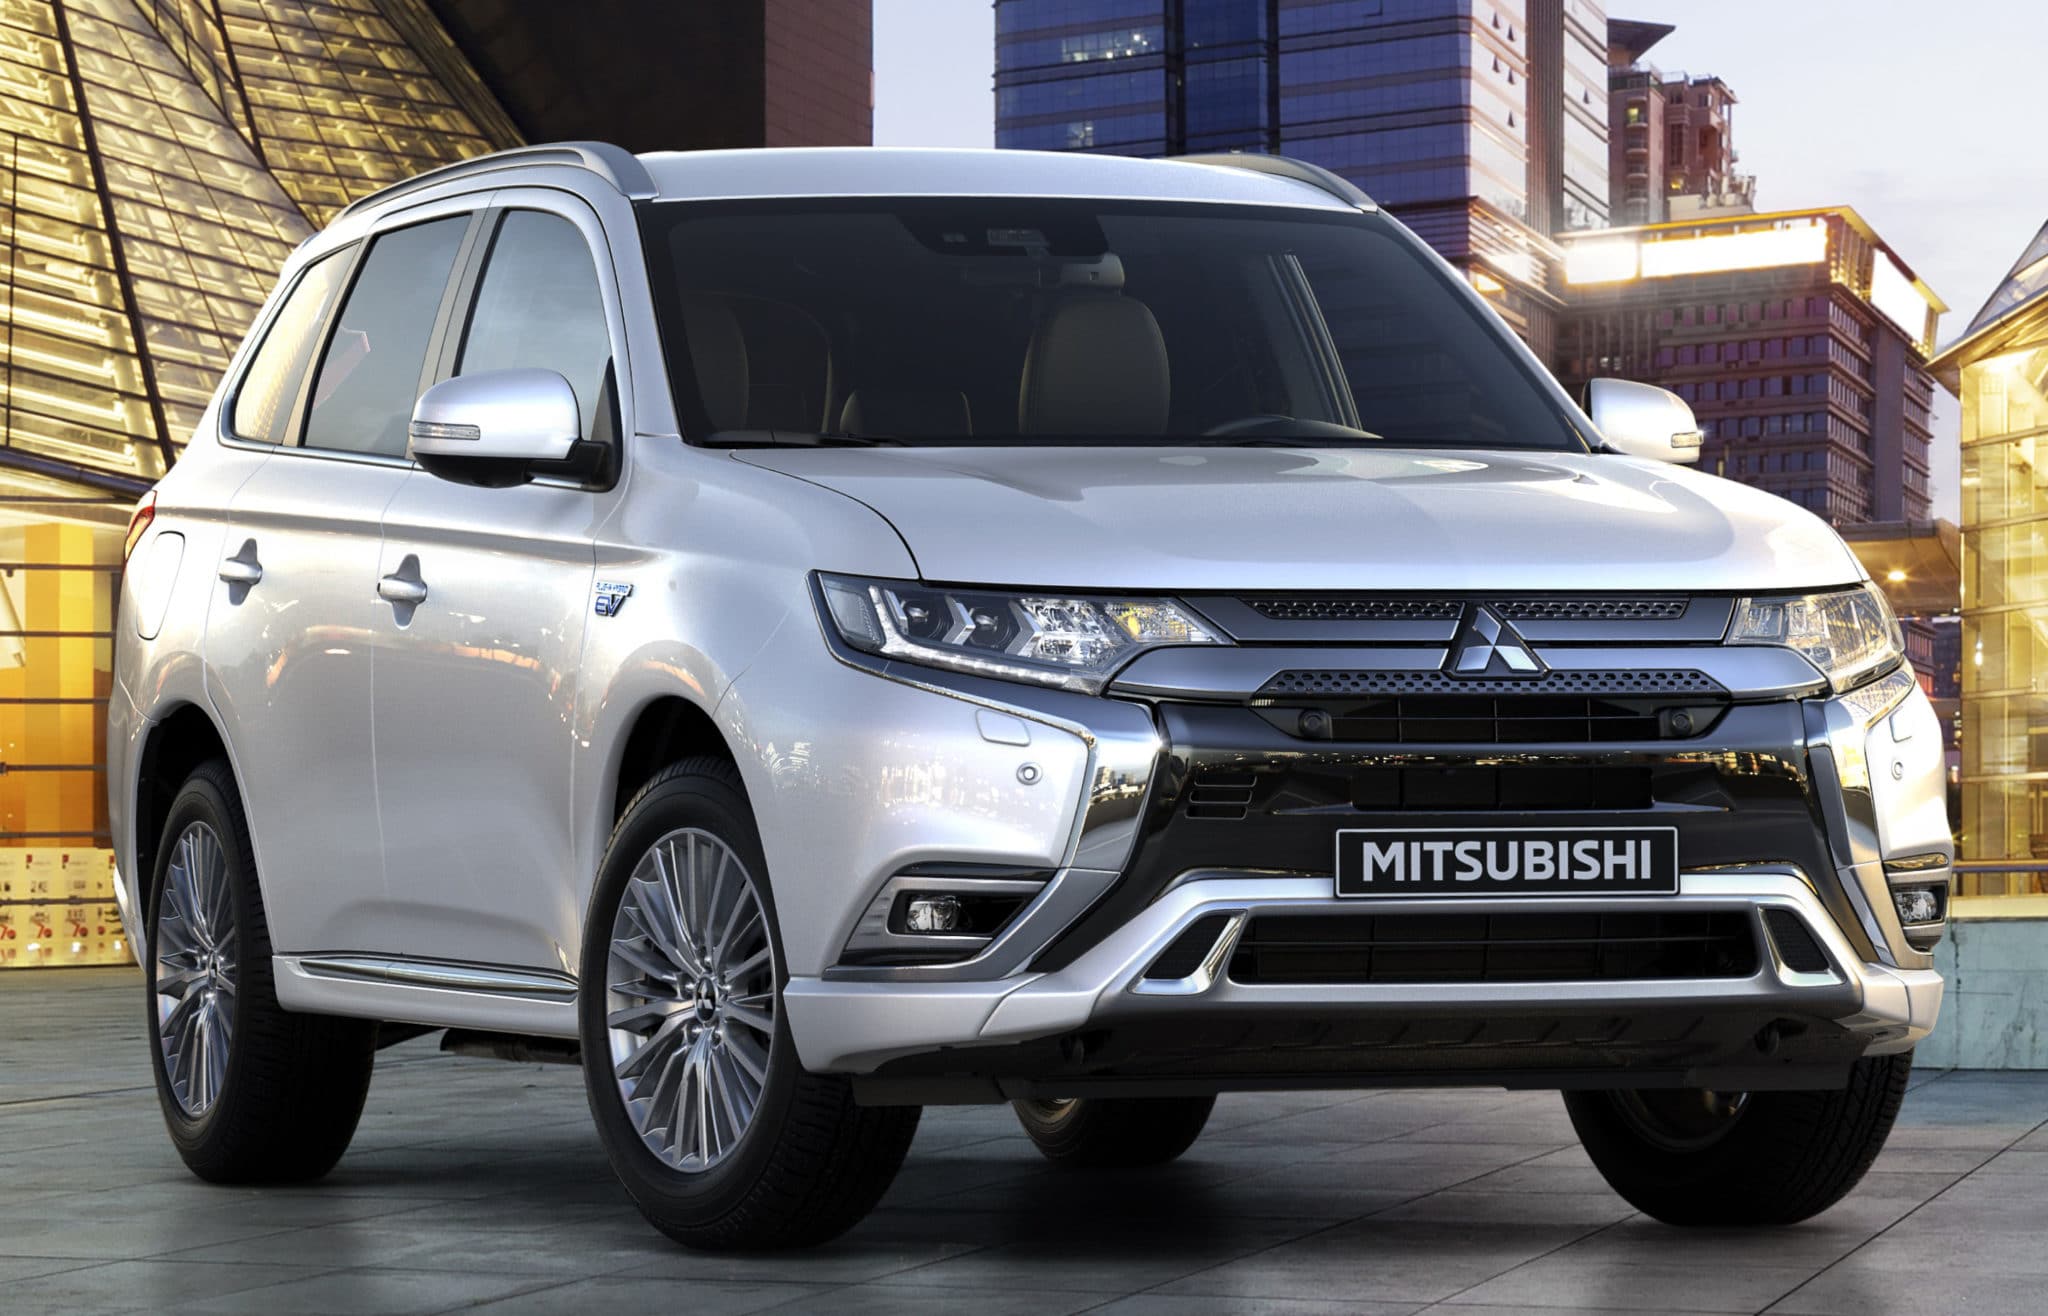 The Practical Side of the 2019 Mitsubishi Outlander PHEV